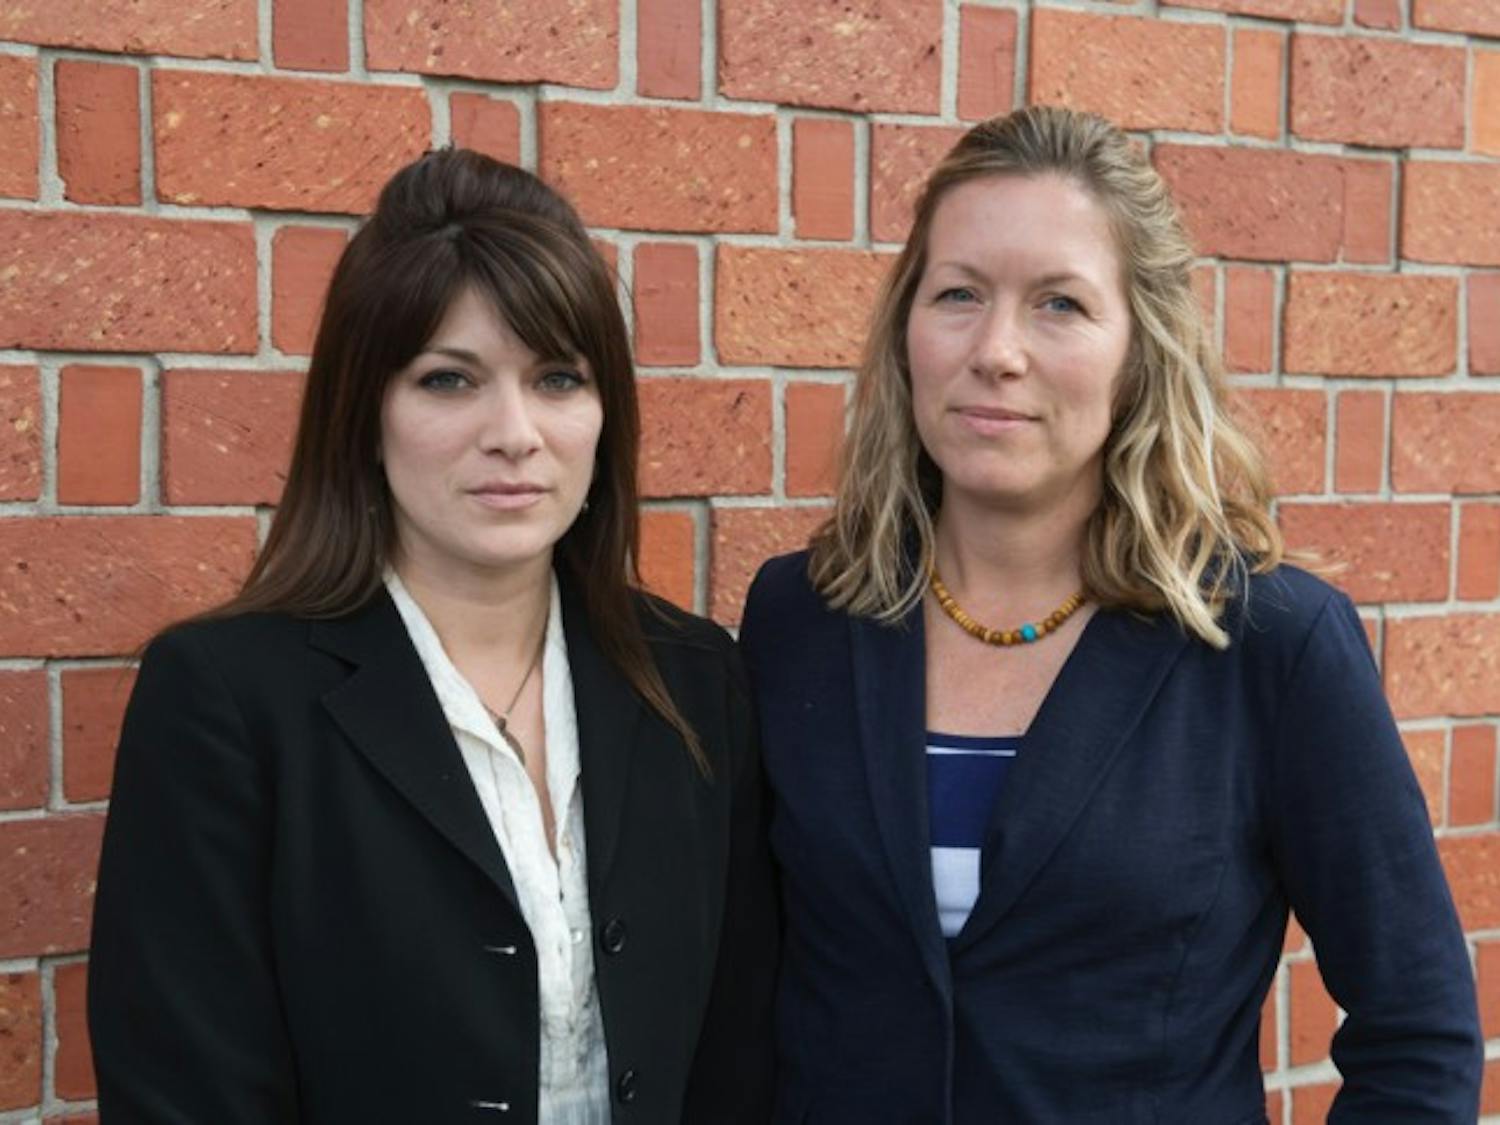 Danielle Ruiz, left, stands with Laura Kalt, her victim advocate at the Gainesville Police Department. Victims can receive free, confidential counseling by contacting the Alachua County Rape Crisis center at 352-264-6760.